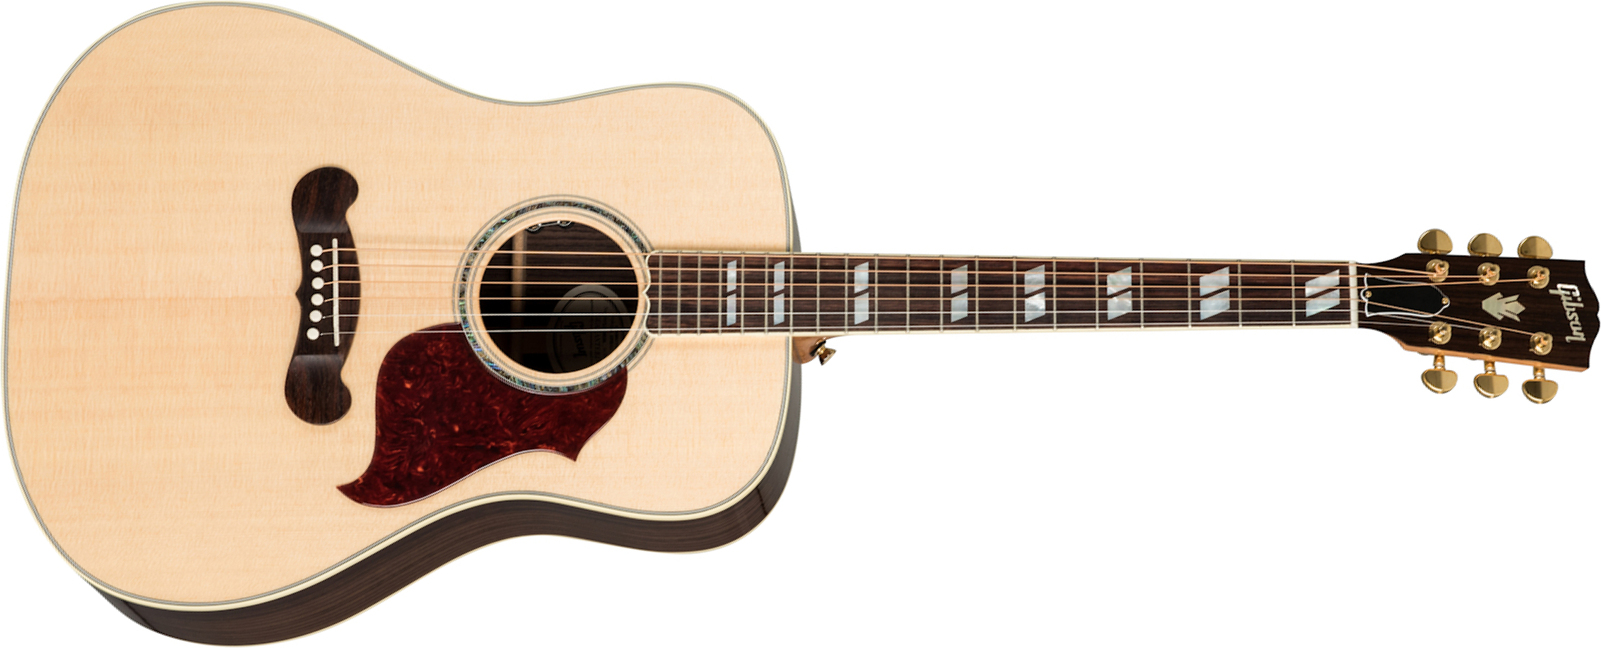 Gibson Songwriter Standard Rosewood 2019 Epicea Palissandre Rw - Antique Natural - Guitare Electro Acoustique - Main picture